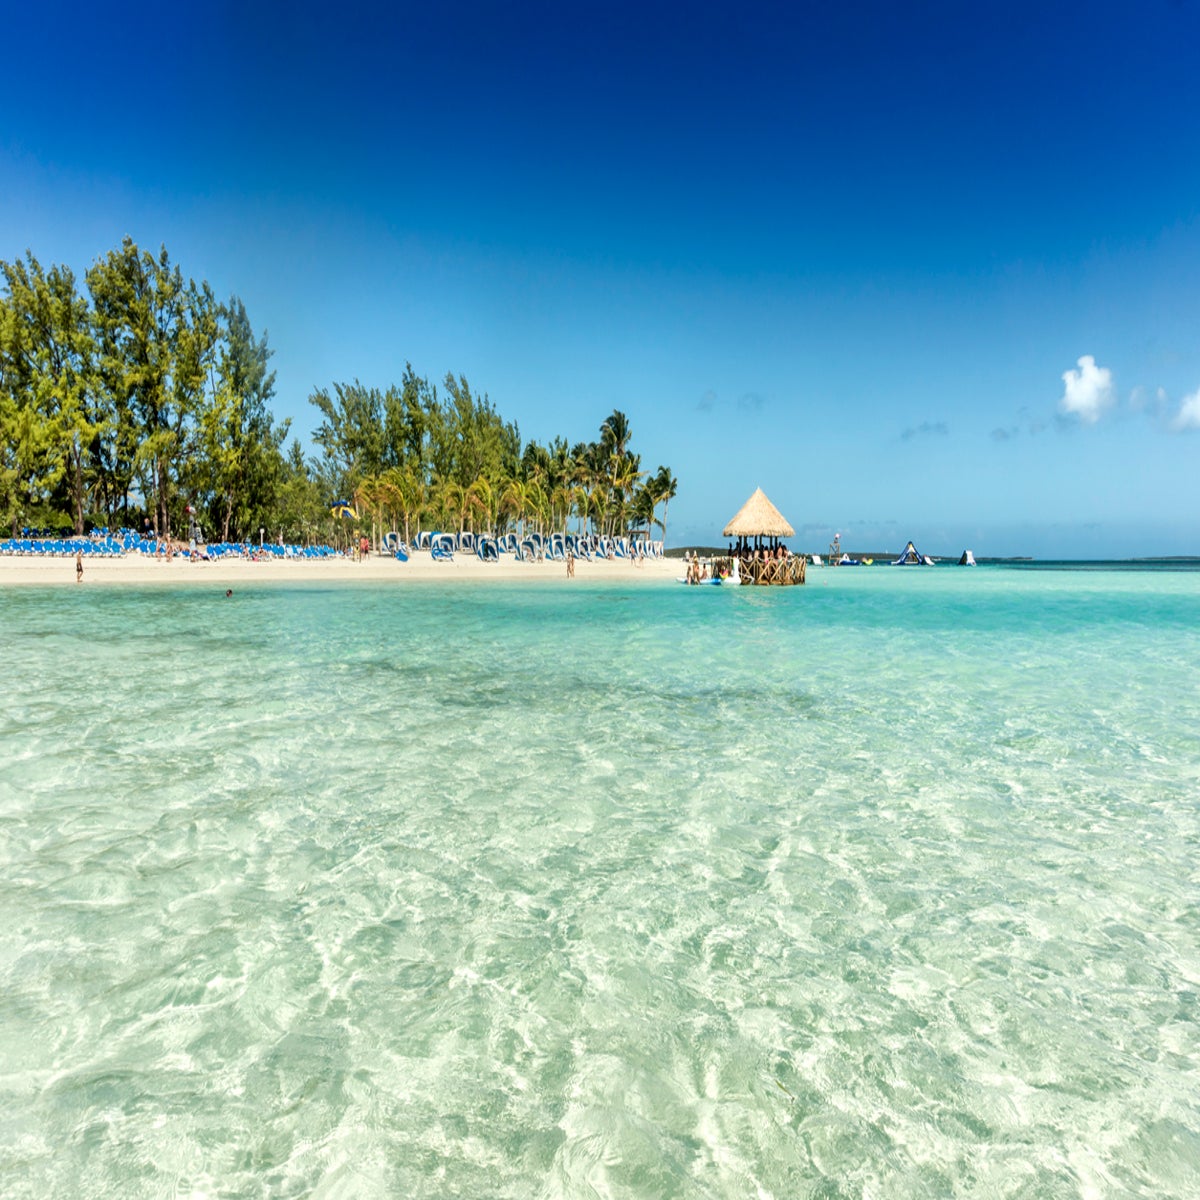 10 Caribbean Islands to Visit This Winter